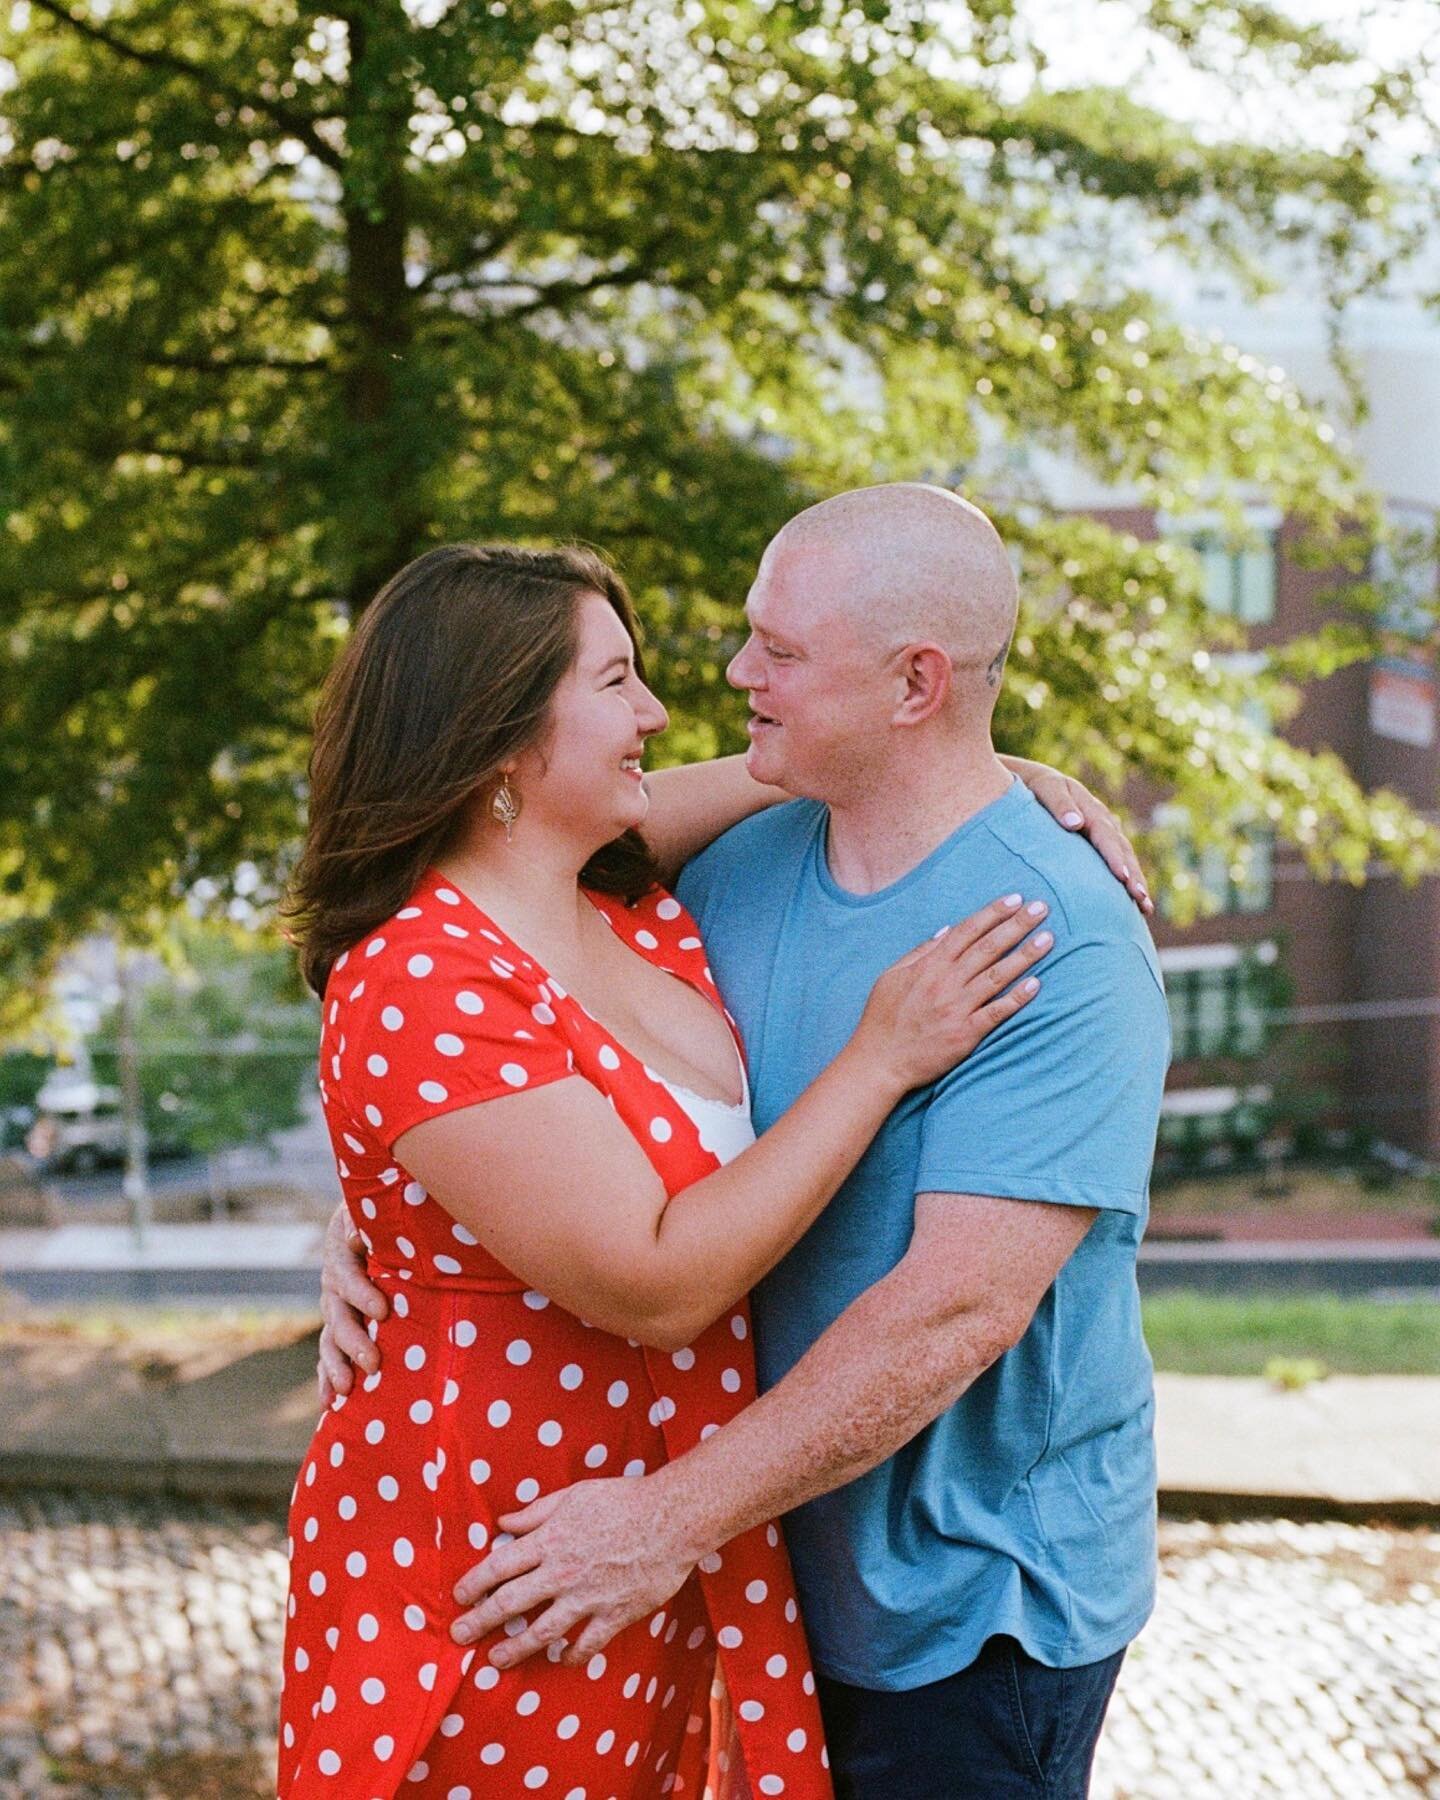 Allison and Jordan on film and digital at Libby Hill a couple weeks ago 😍 so excited about getting this film back and having the chance to photograph these two.